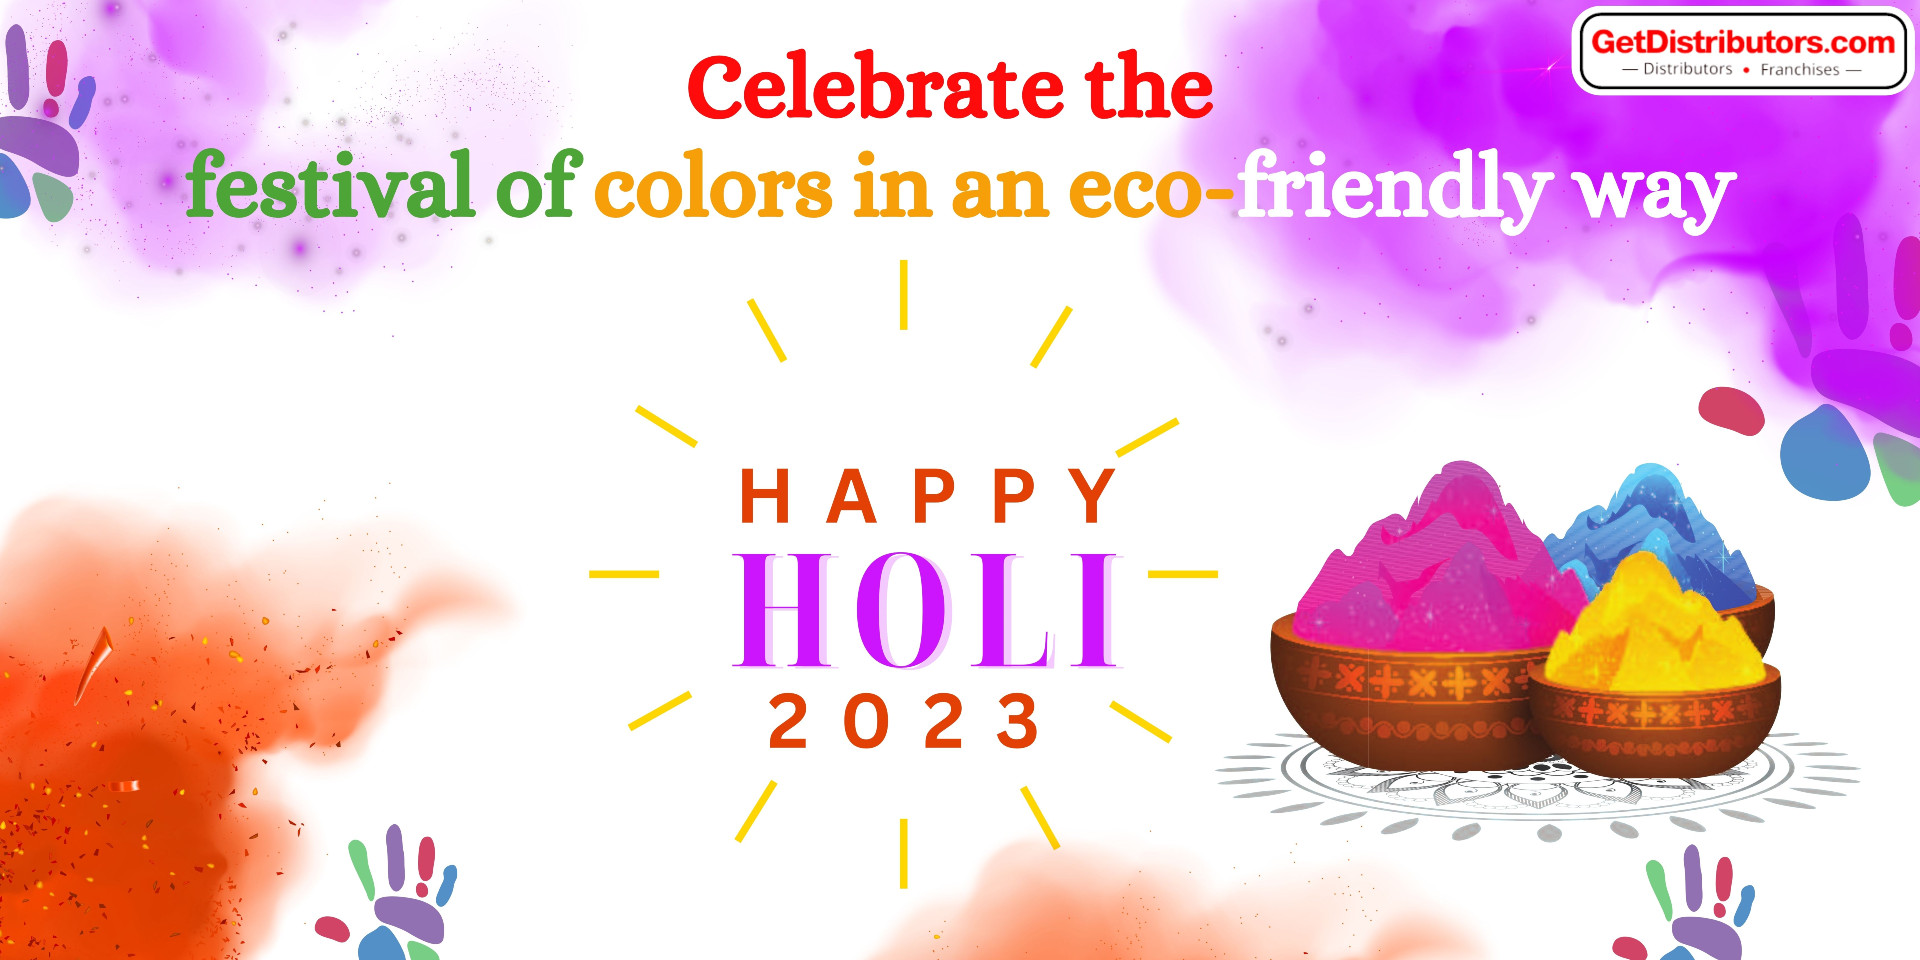 Holi 2023 Celebrate the festival of colors in an eco-friendly way